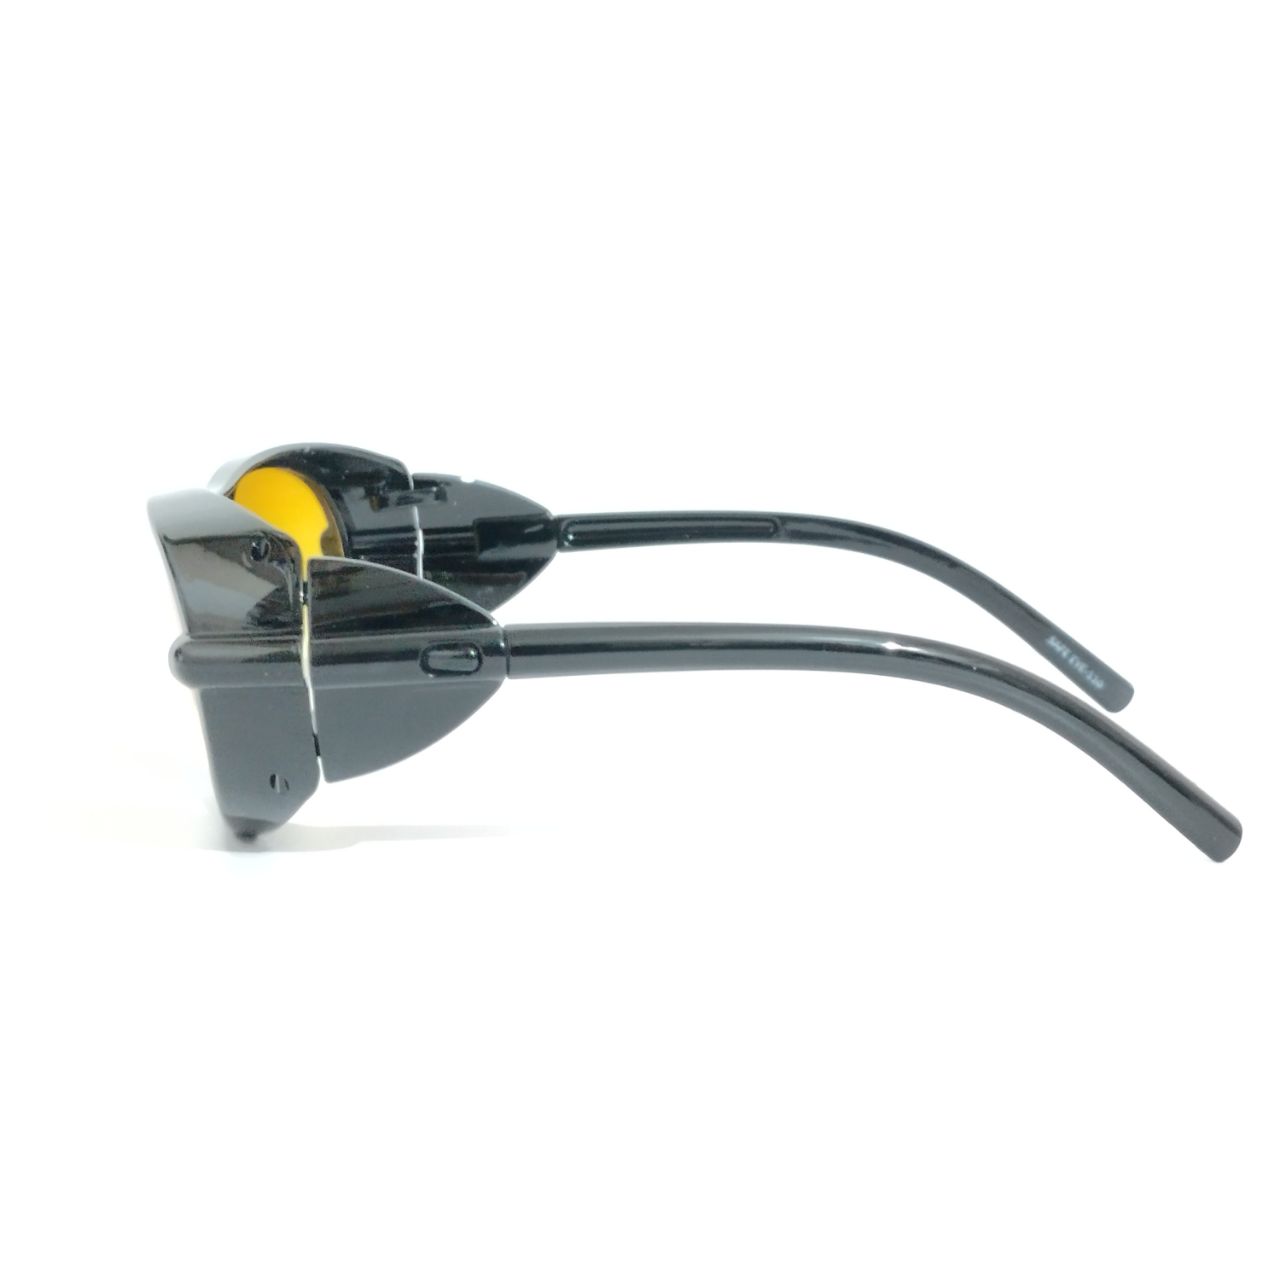 Sports Driving Sunglasses with Side Shield